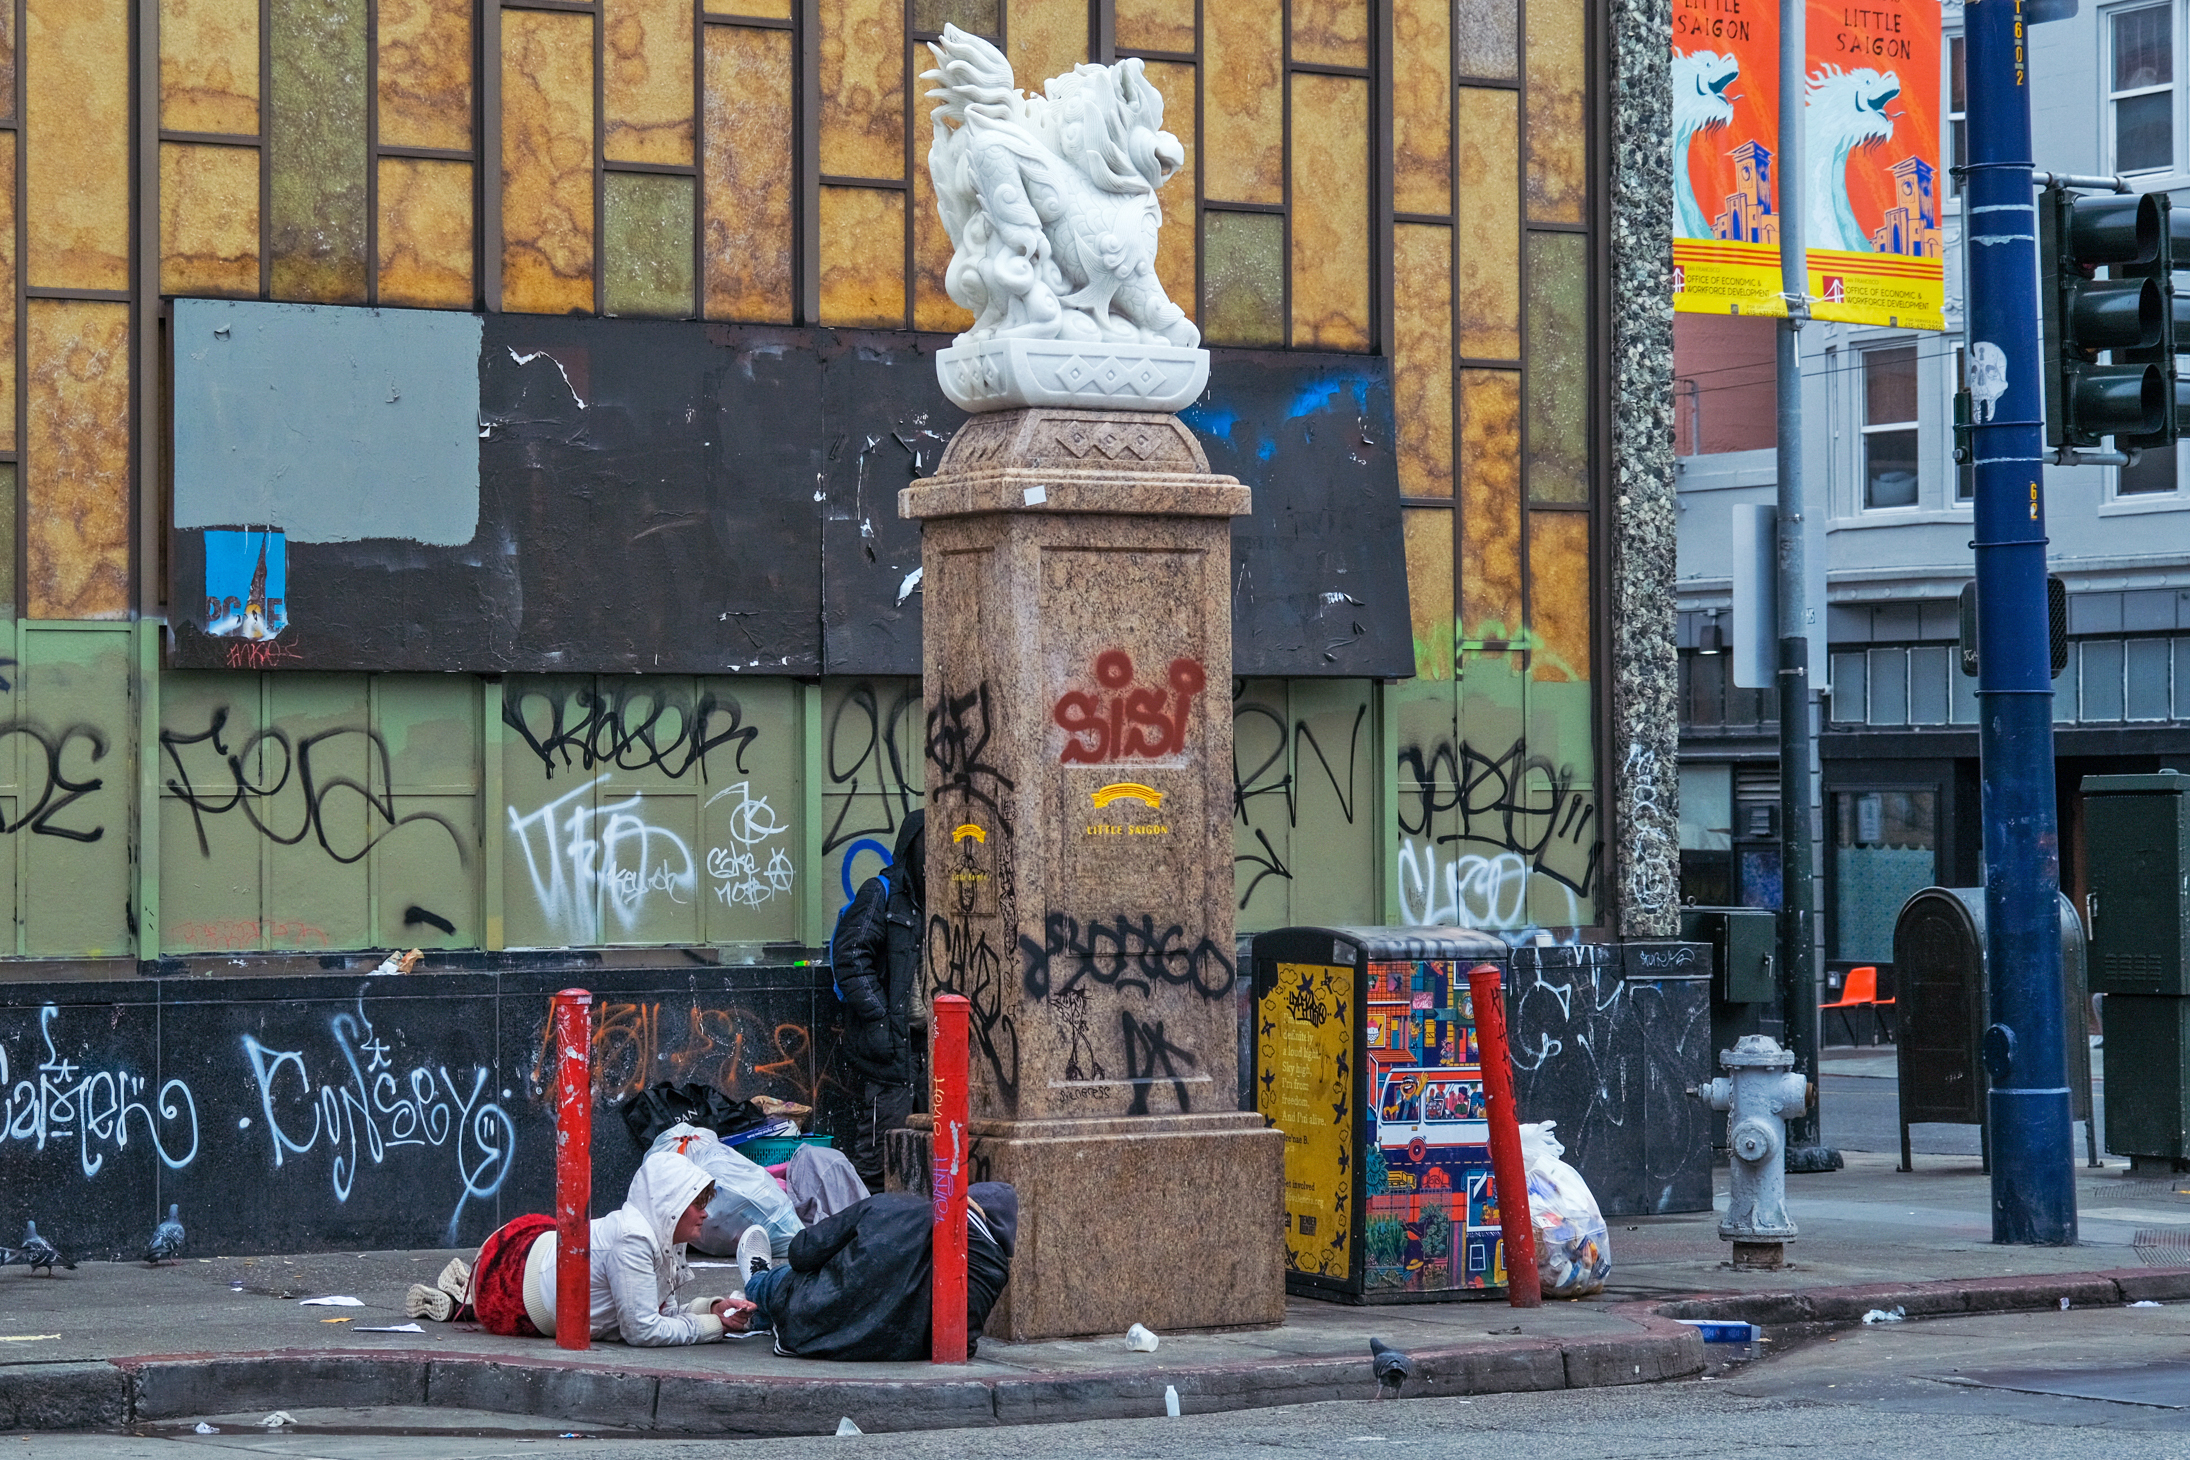 A graffiti-laden urban corner with a person resting by a statue base, surrounded by trash and discarded items.